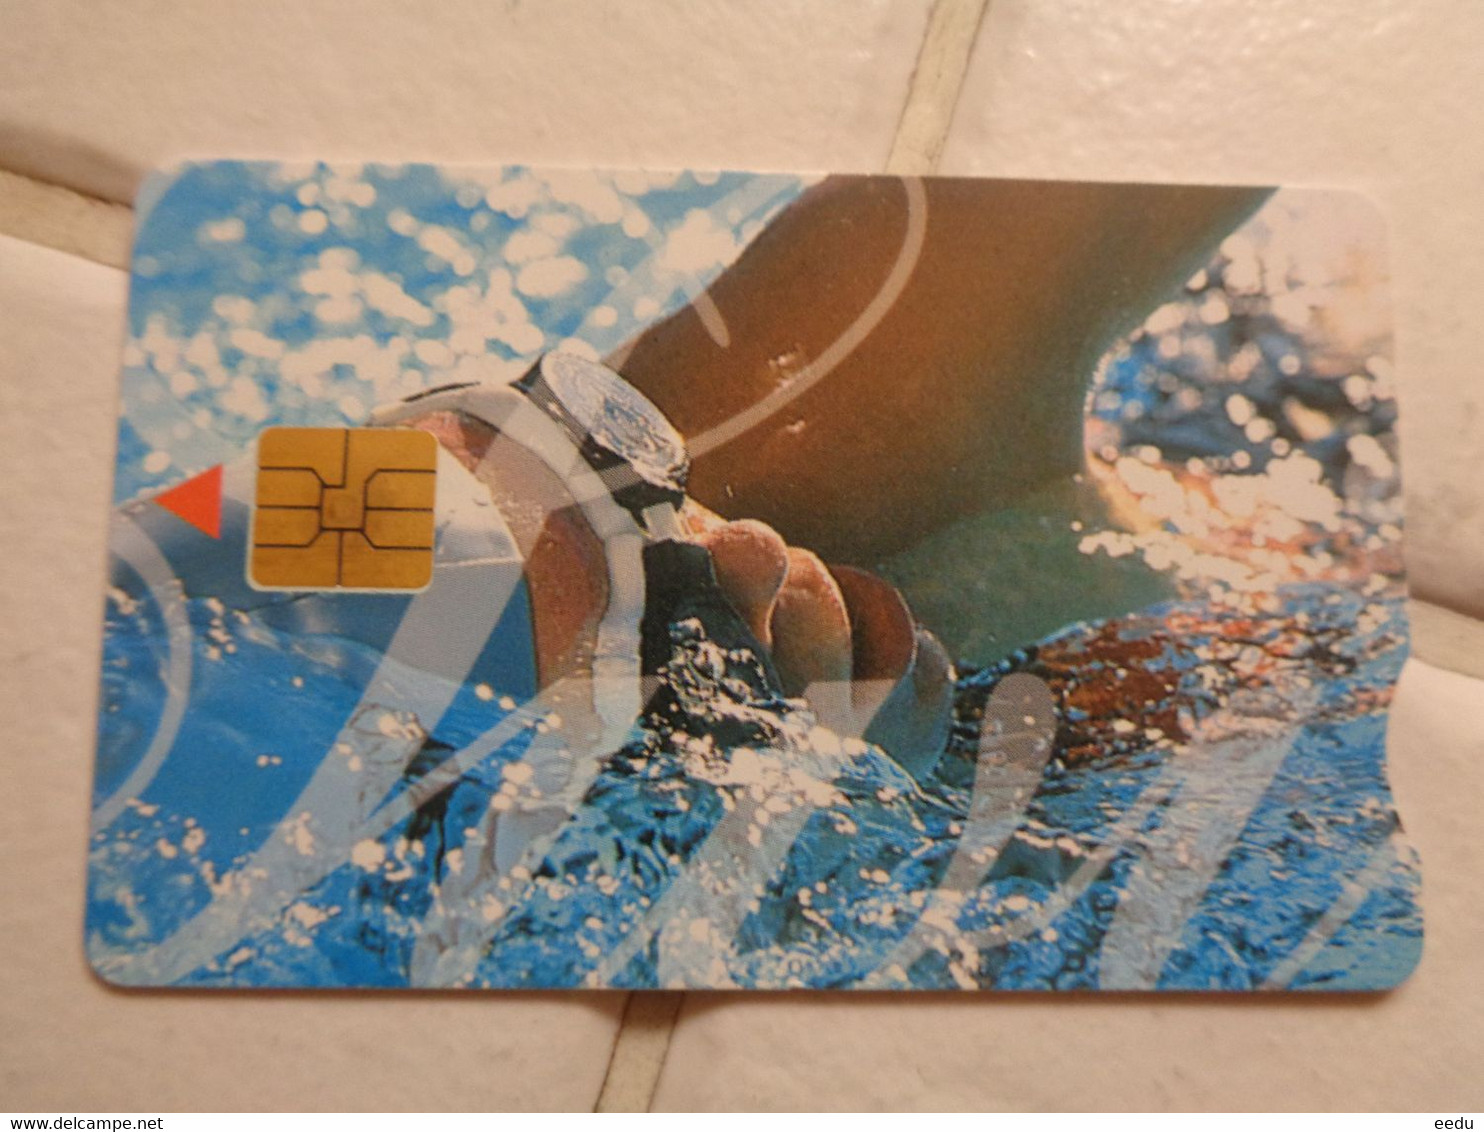 South Africa Phonecard - Olympische Spiele